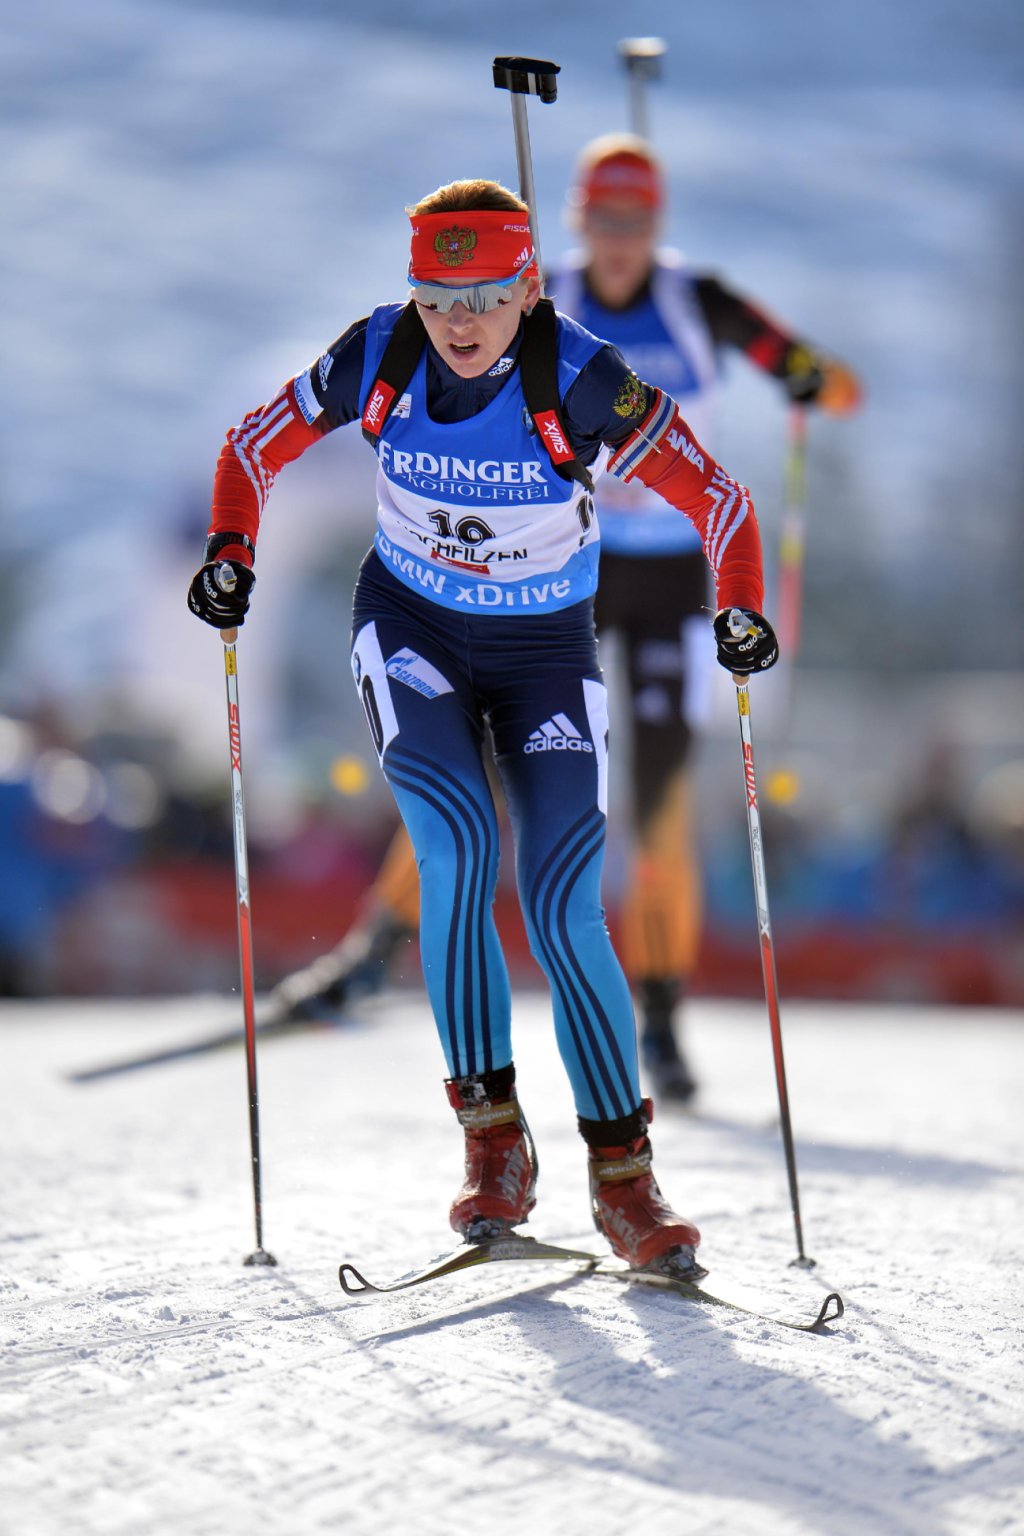 Russia's second placed Ekaterina Glazyrina skis during the фото (photo)